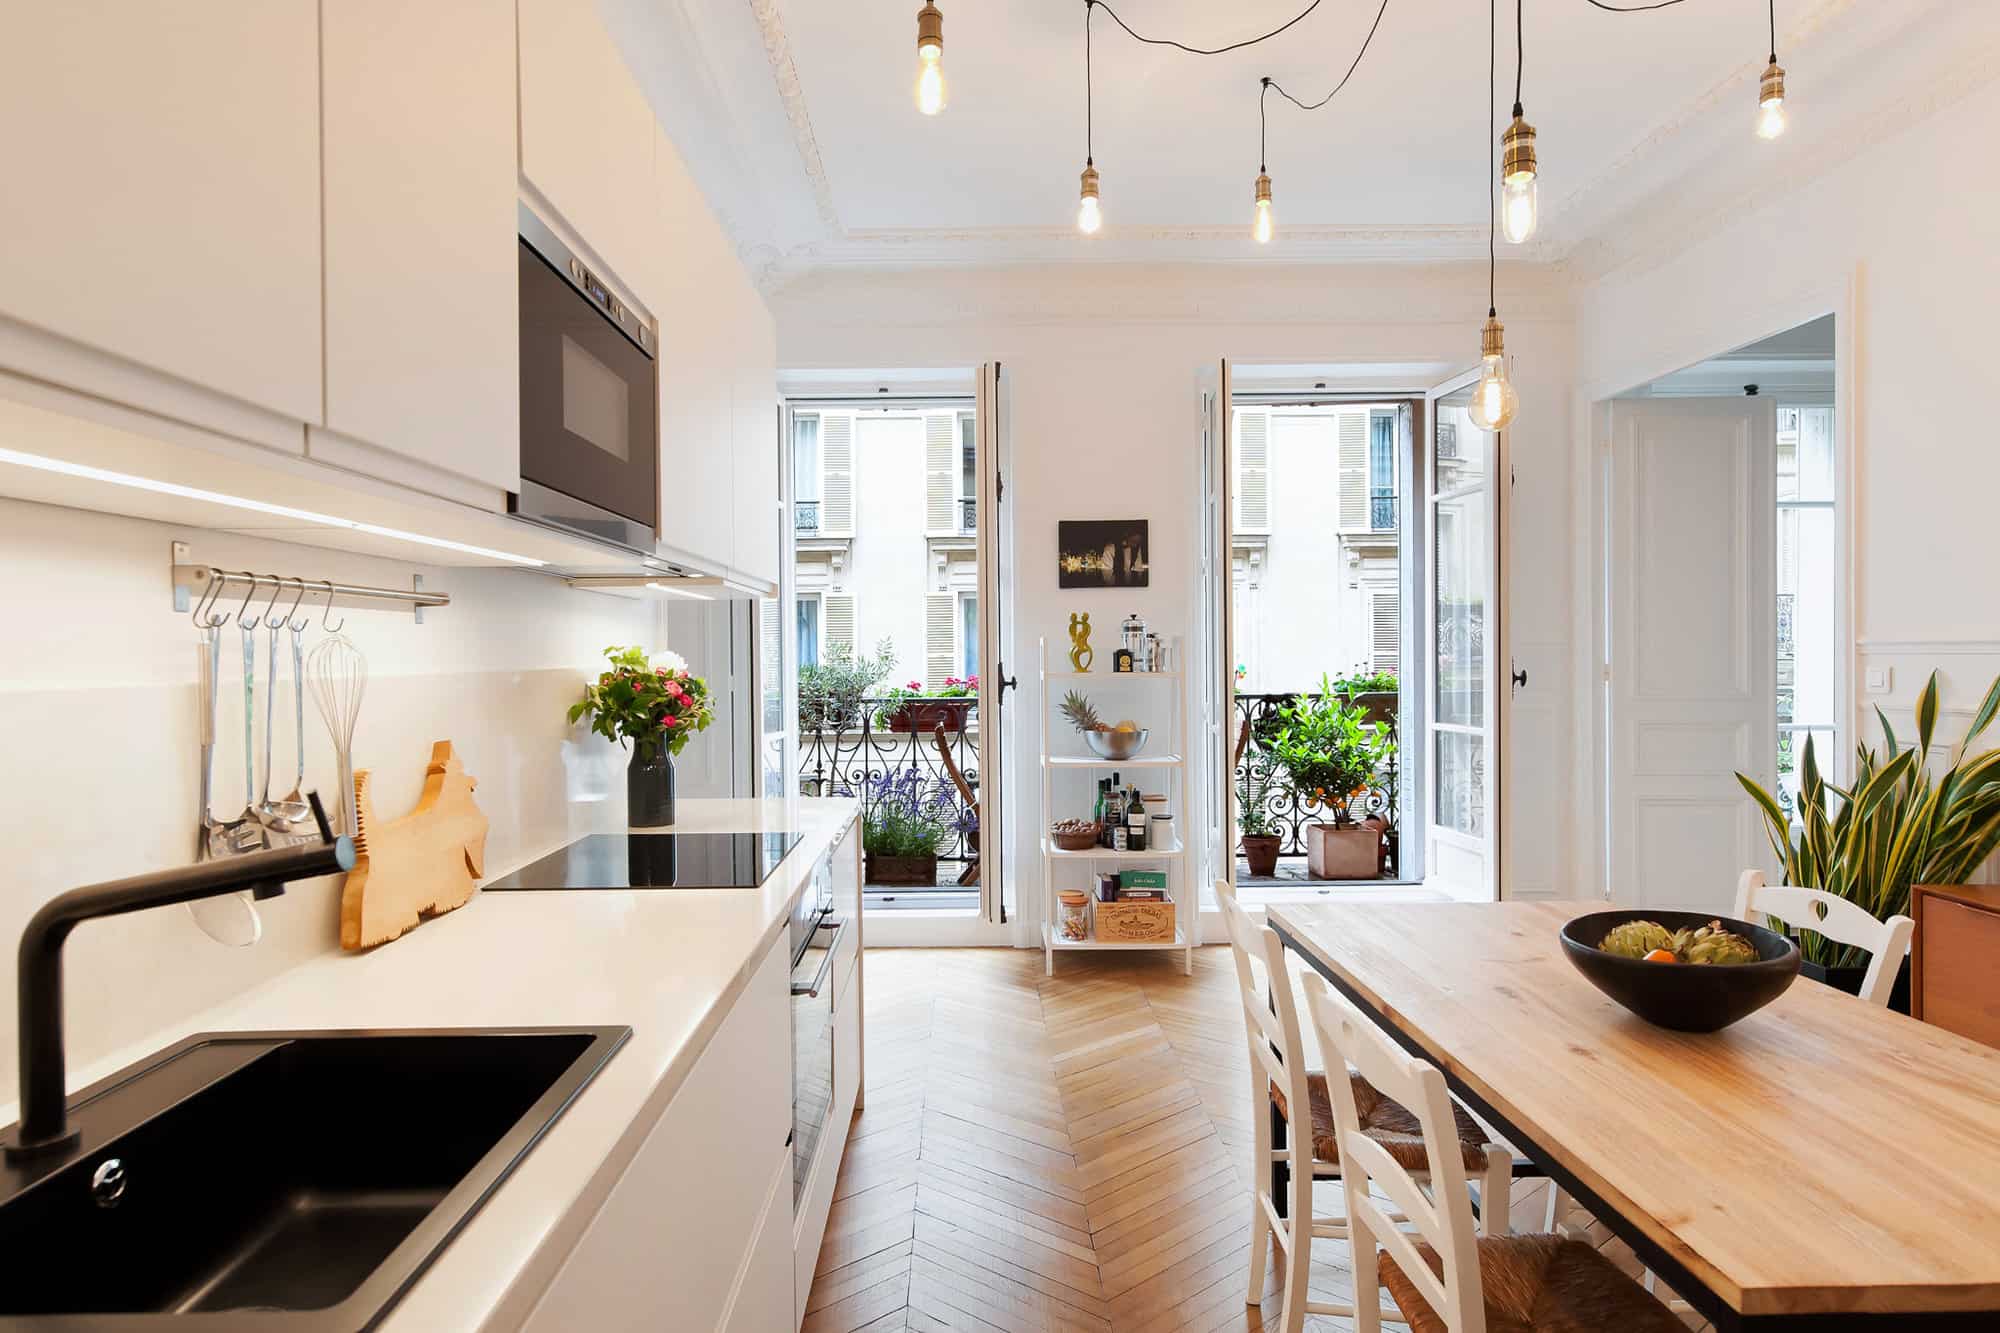 A picture of a spacious Parisian apartment. In this photo taken from an American-styled open kitchen, you will see 2 tall french windows opening to the balcony full of plants. The kitchen is sophisticatedly decorated in white and tan. 